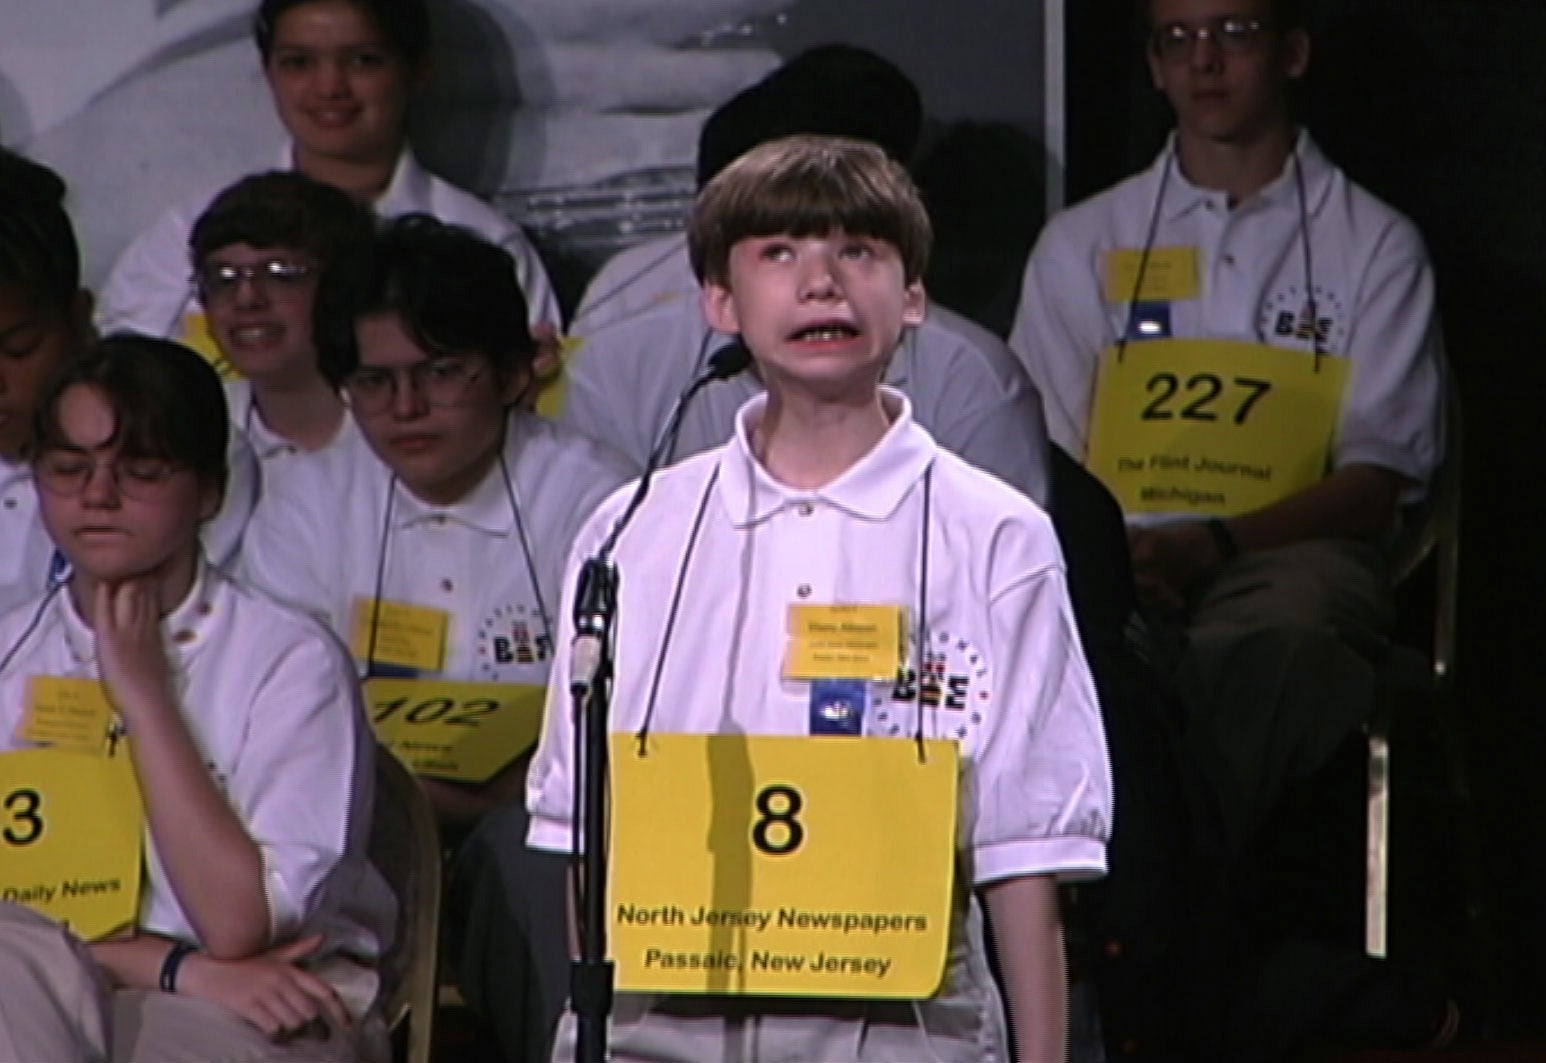 The 2002 film ‘Spellbound’ followed a group of young people competing in spelling bees